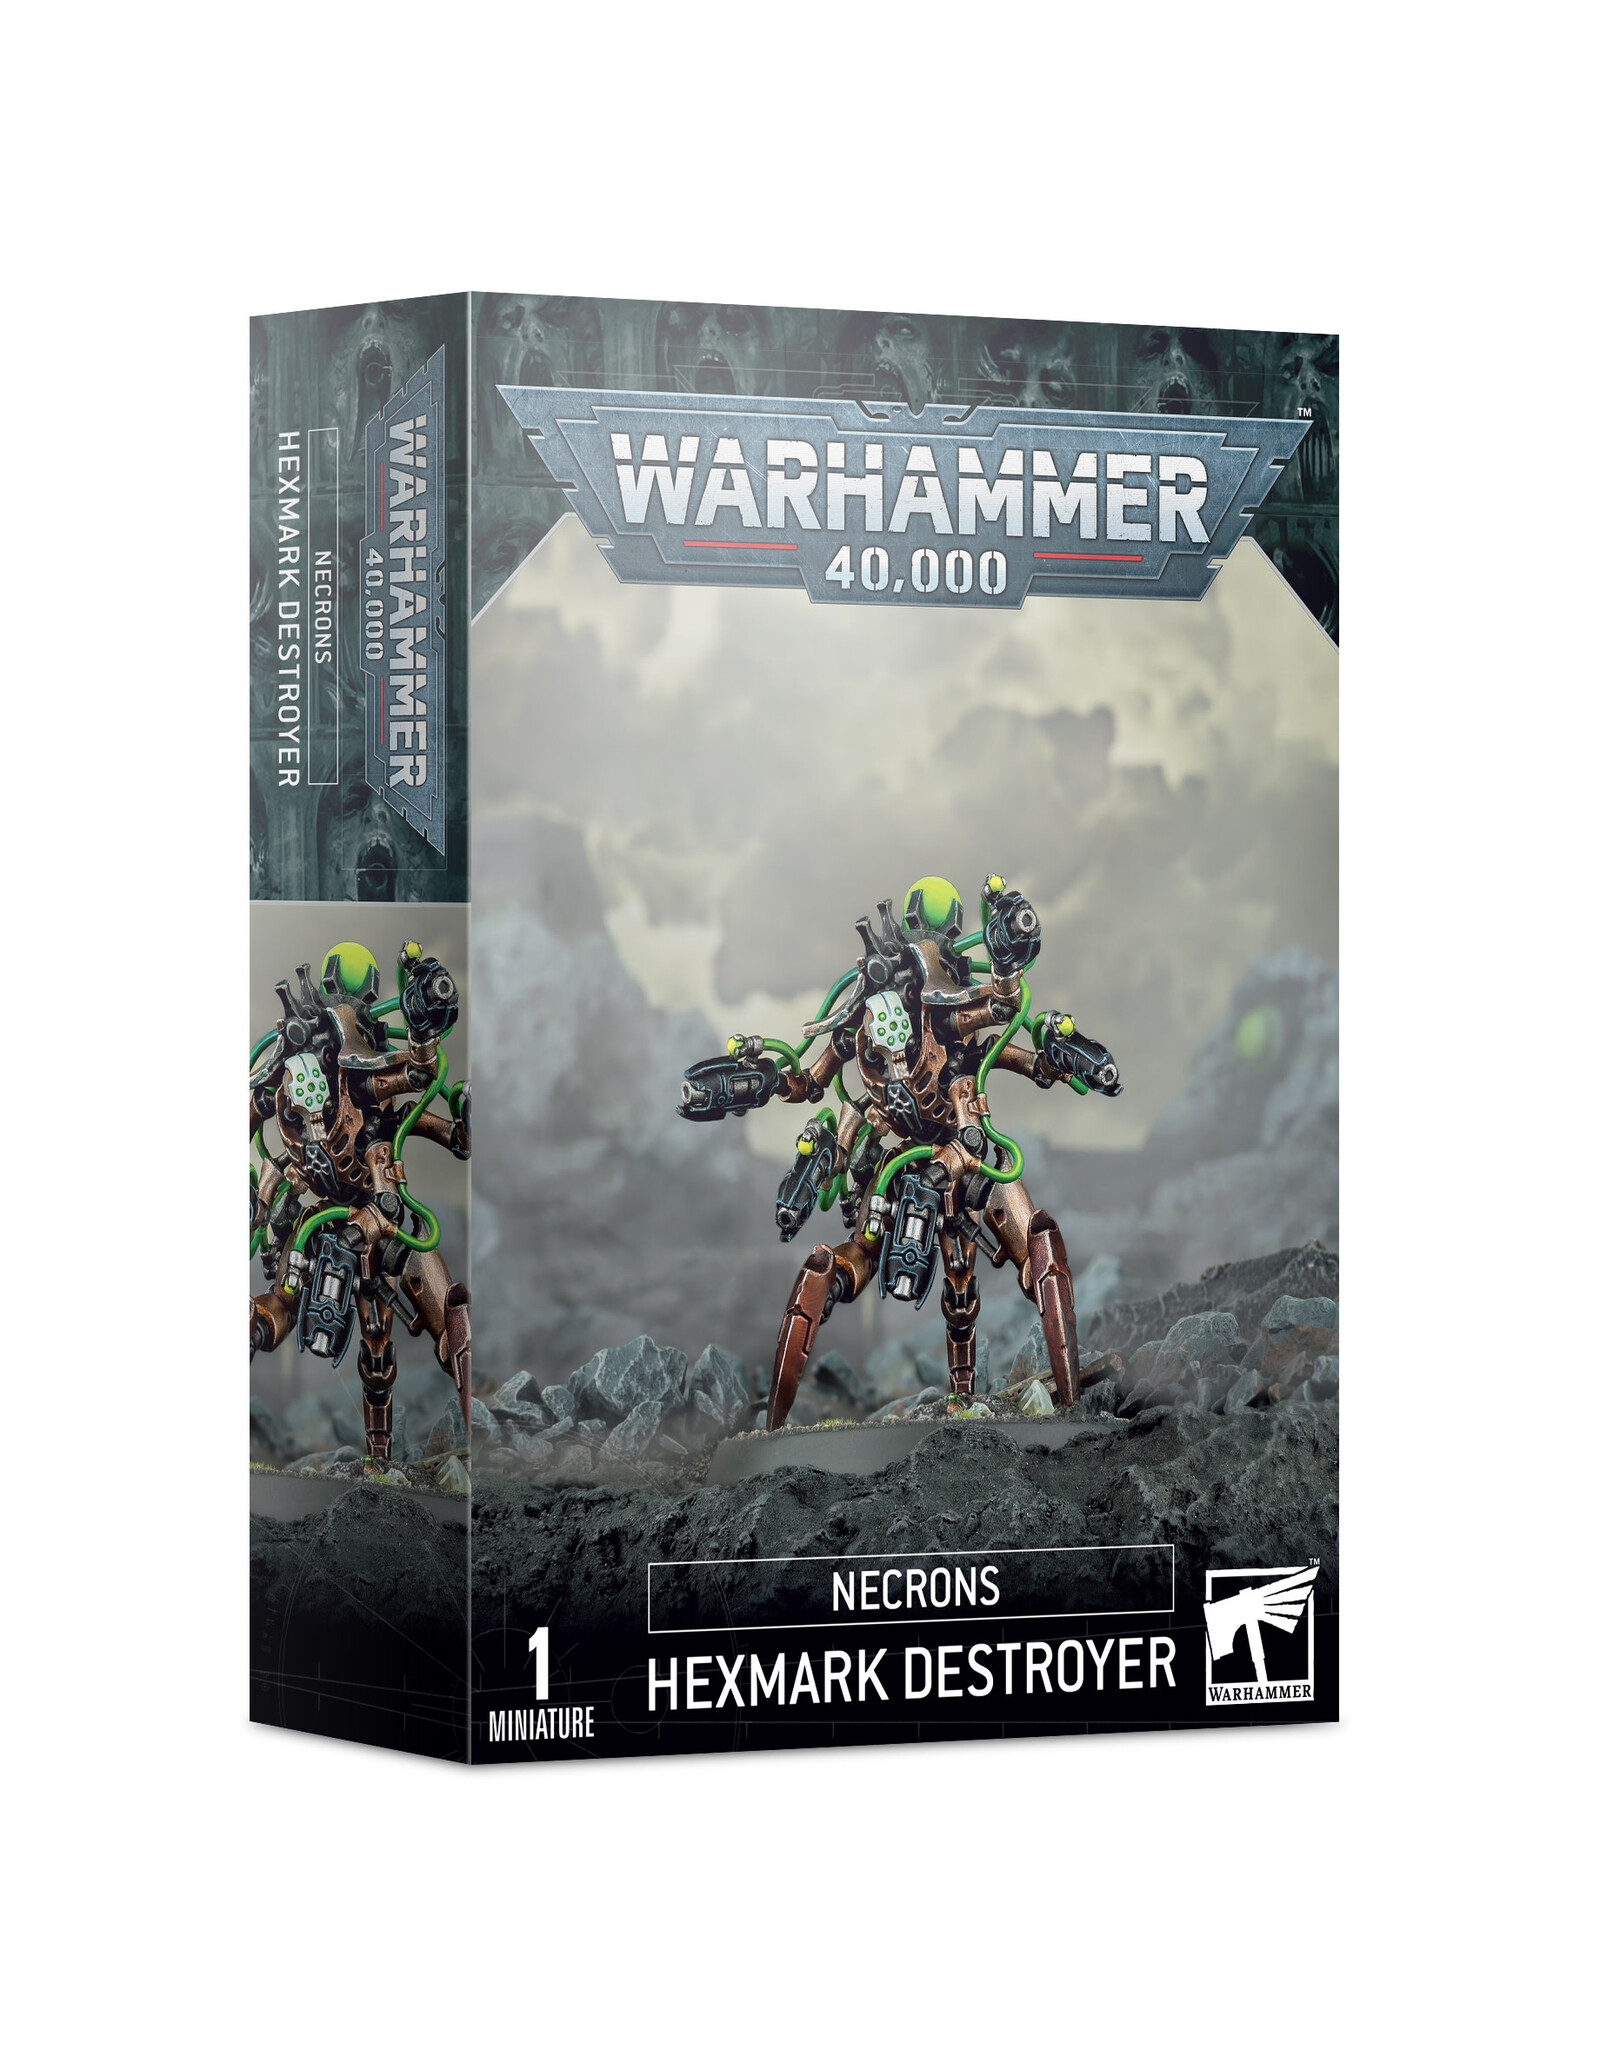 Unleash the Destroyers and - Warhammer: The Horus Heresy